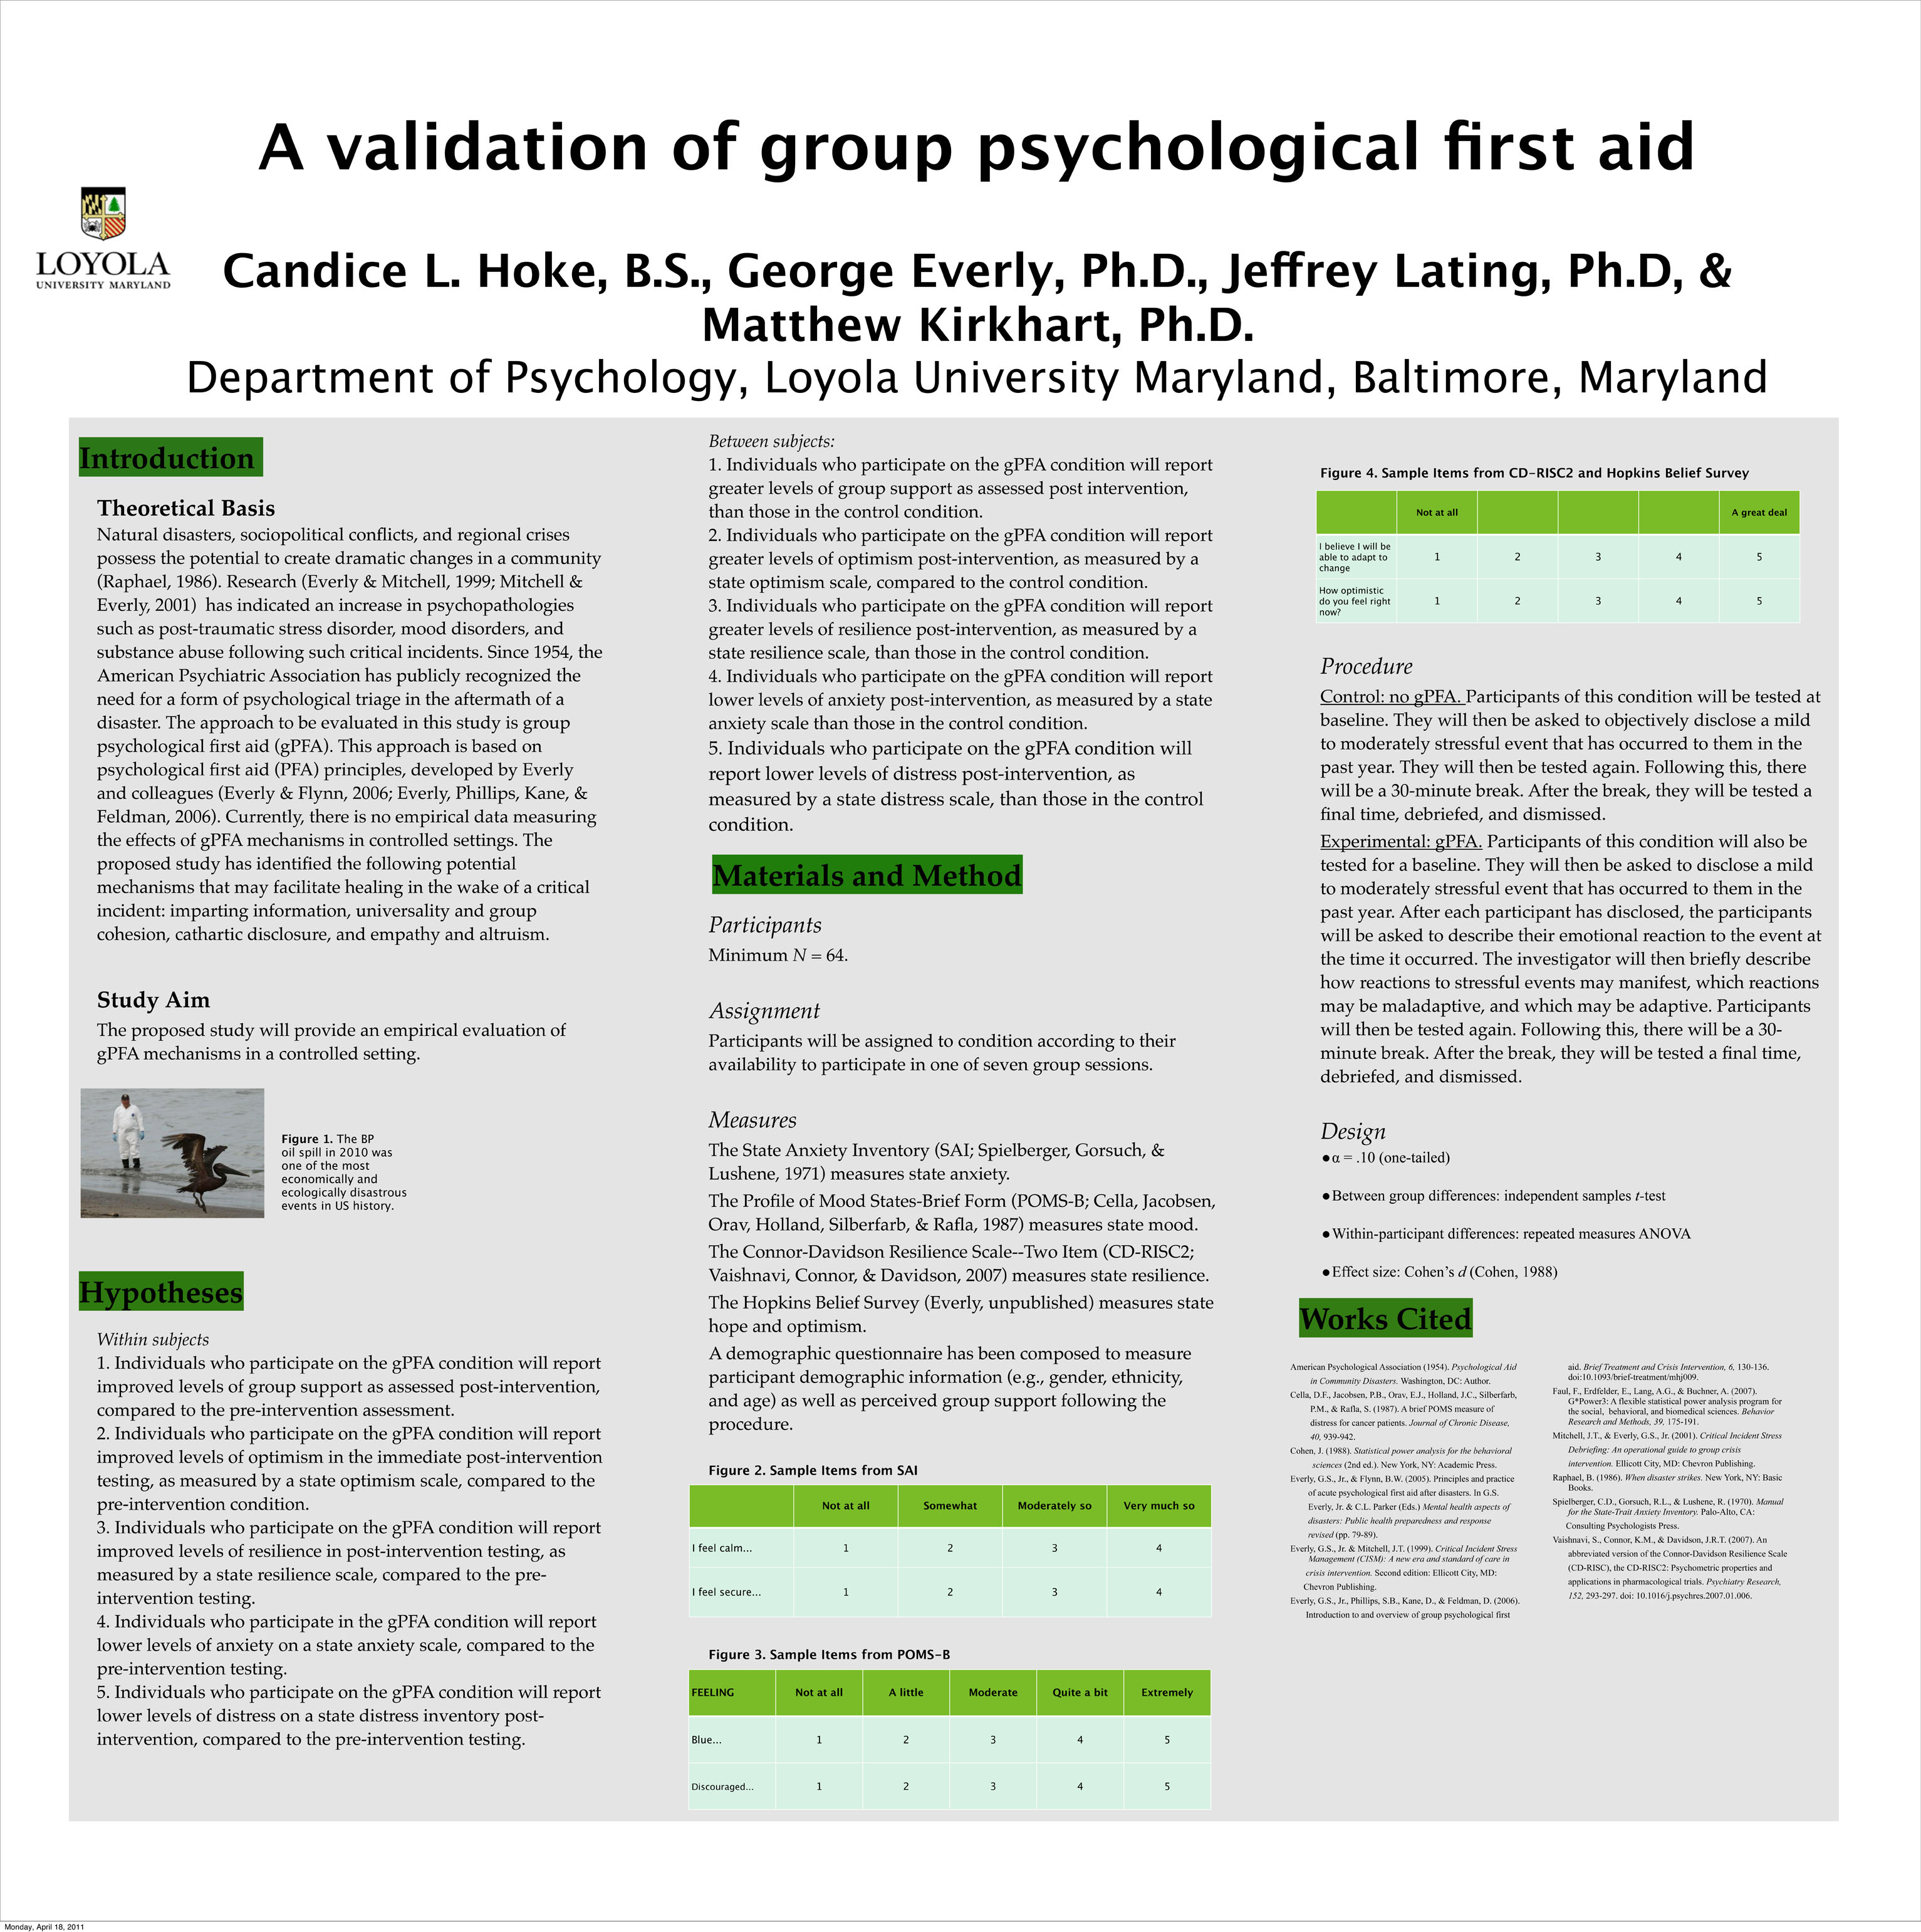 Poster image:   A Validation of Group Psychological First Aid